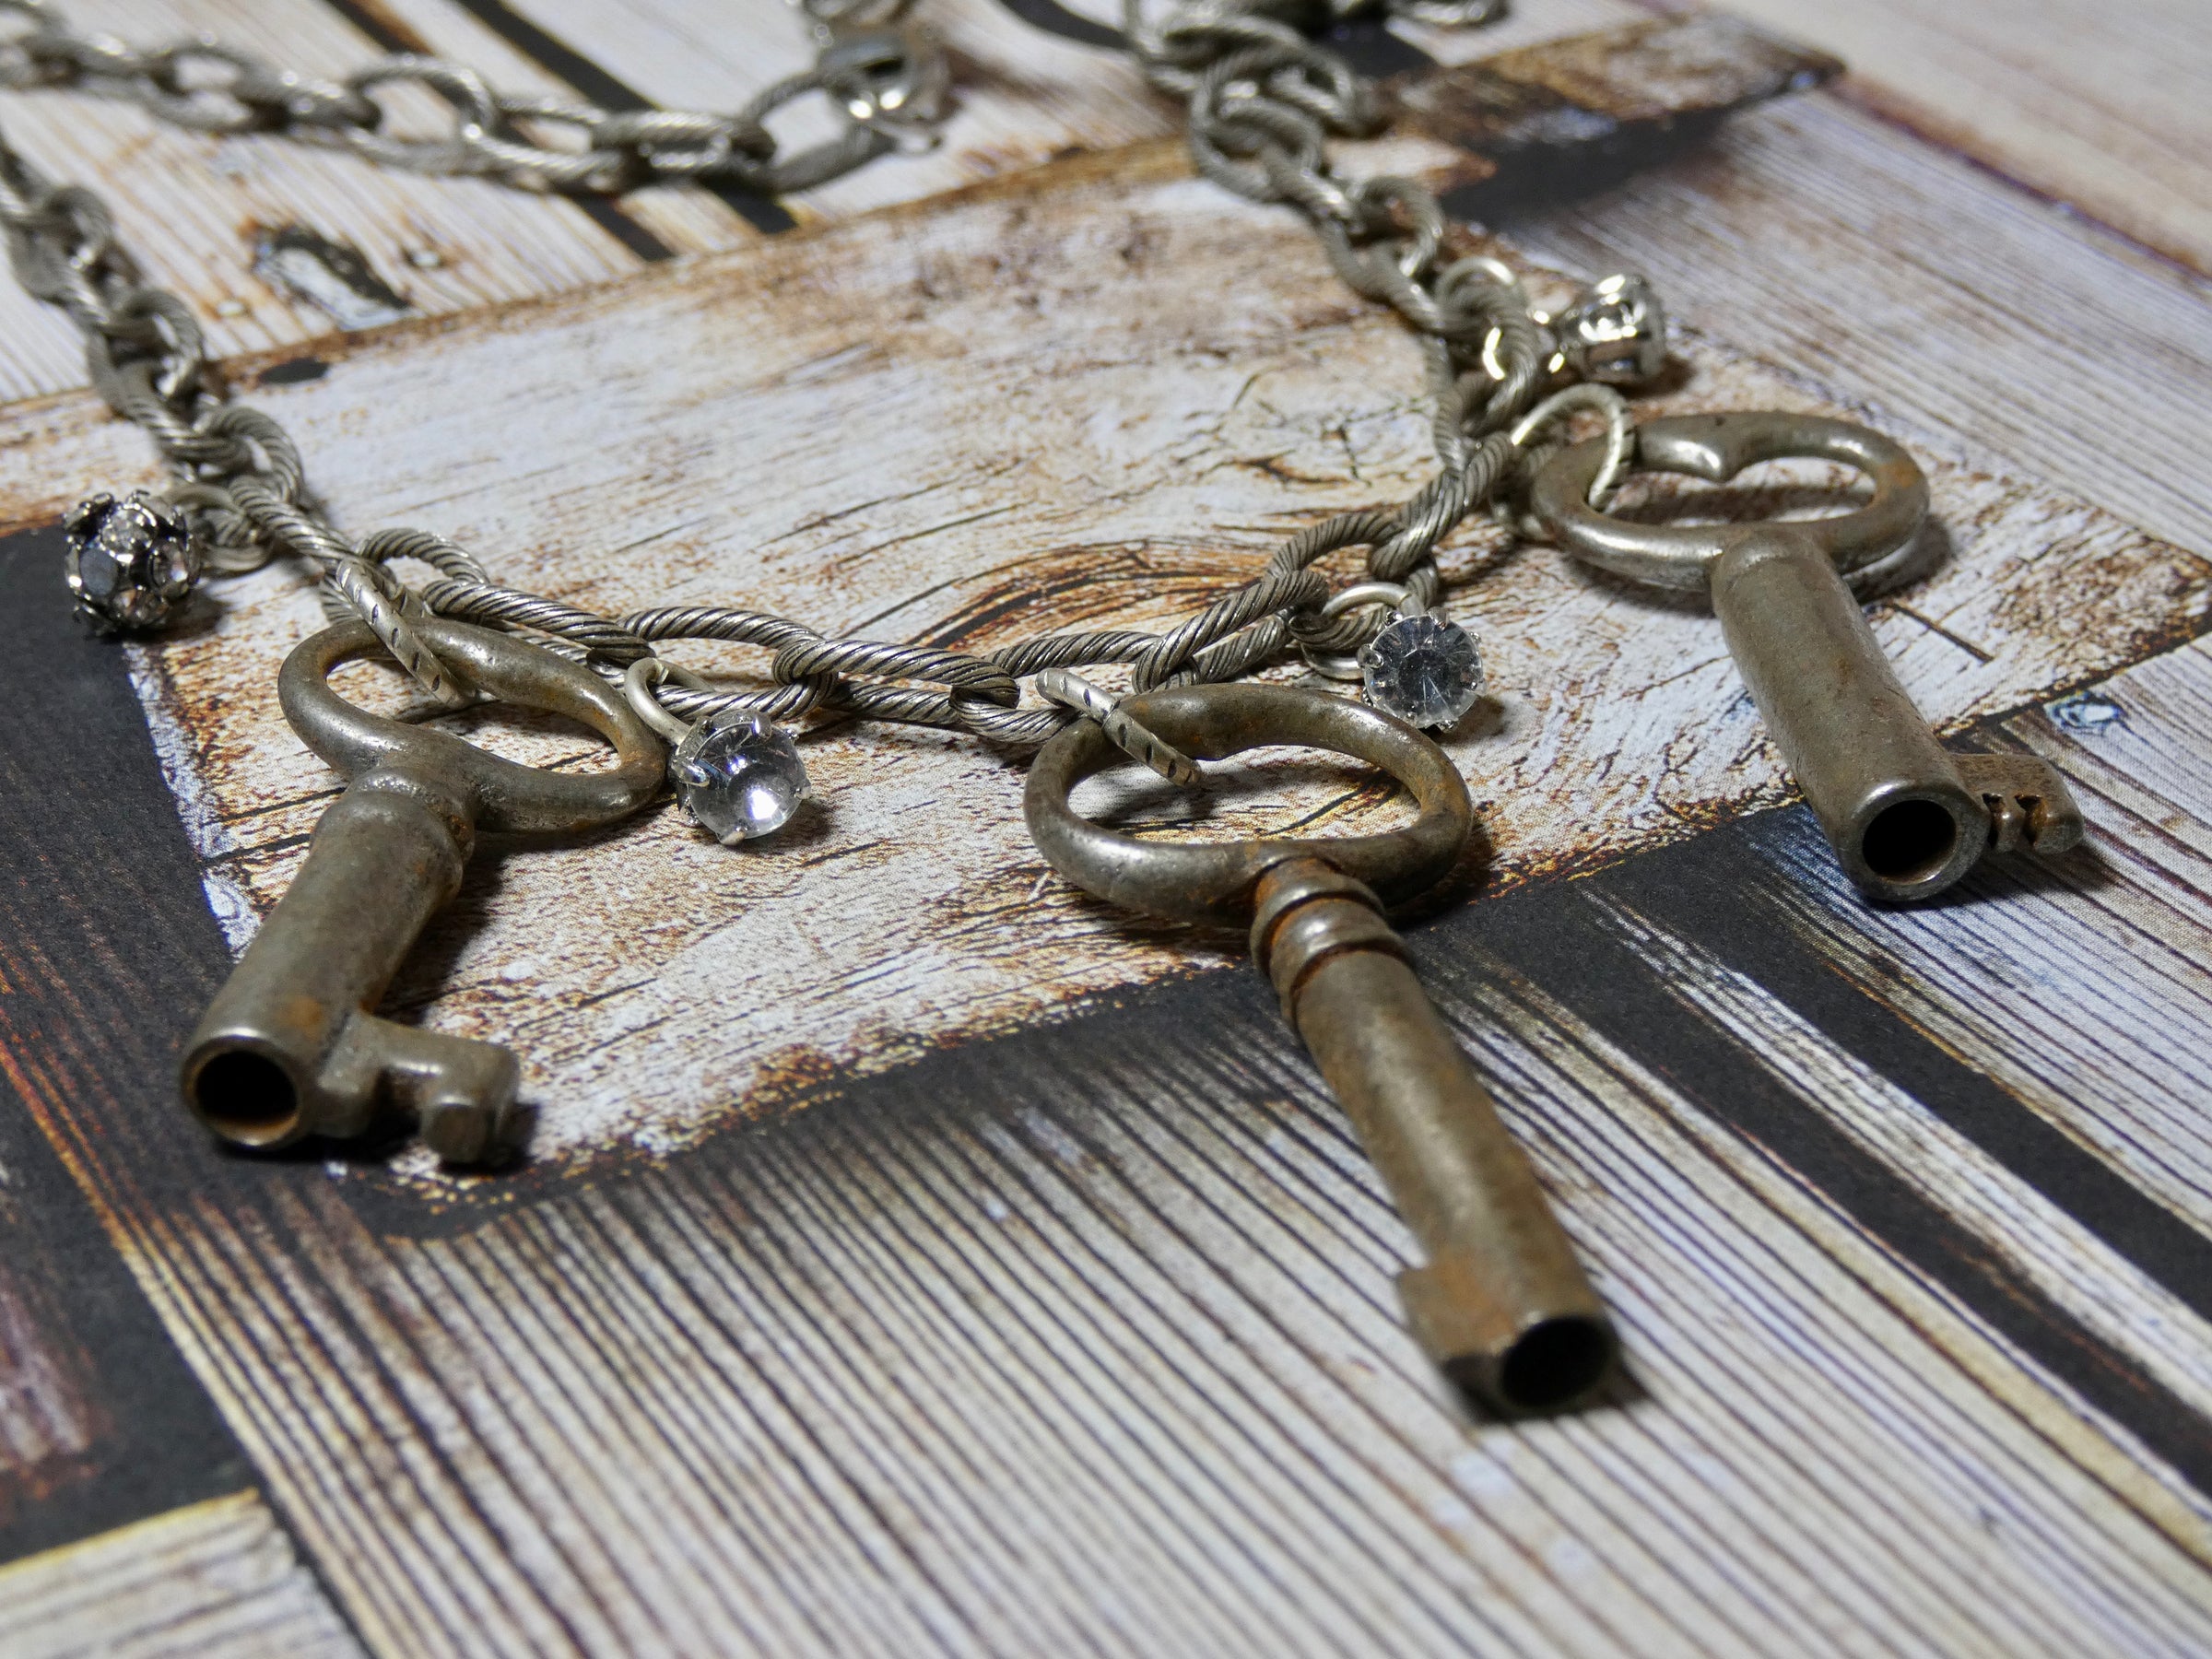 Skull Key and Lock Necklace Handmade in Sterling Silver With 